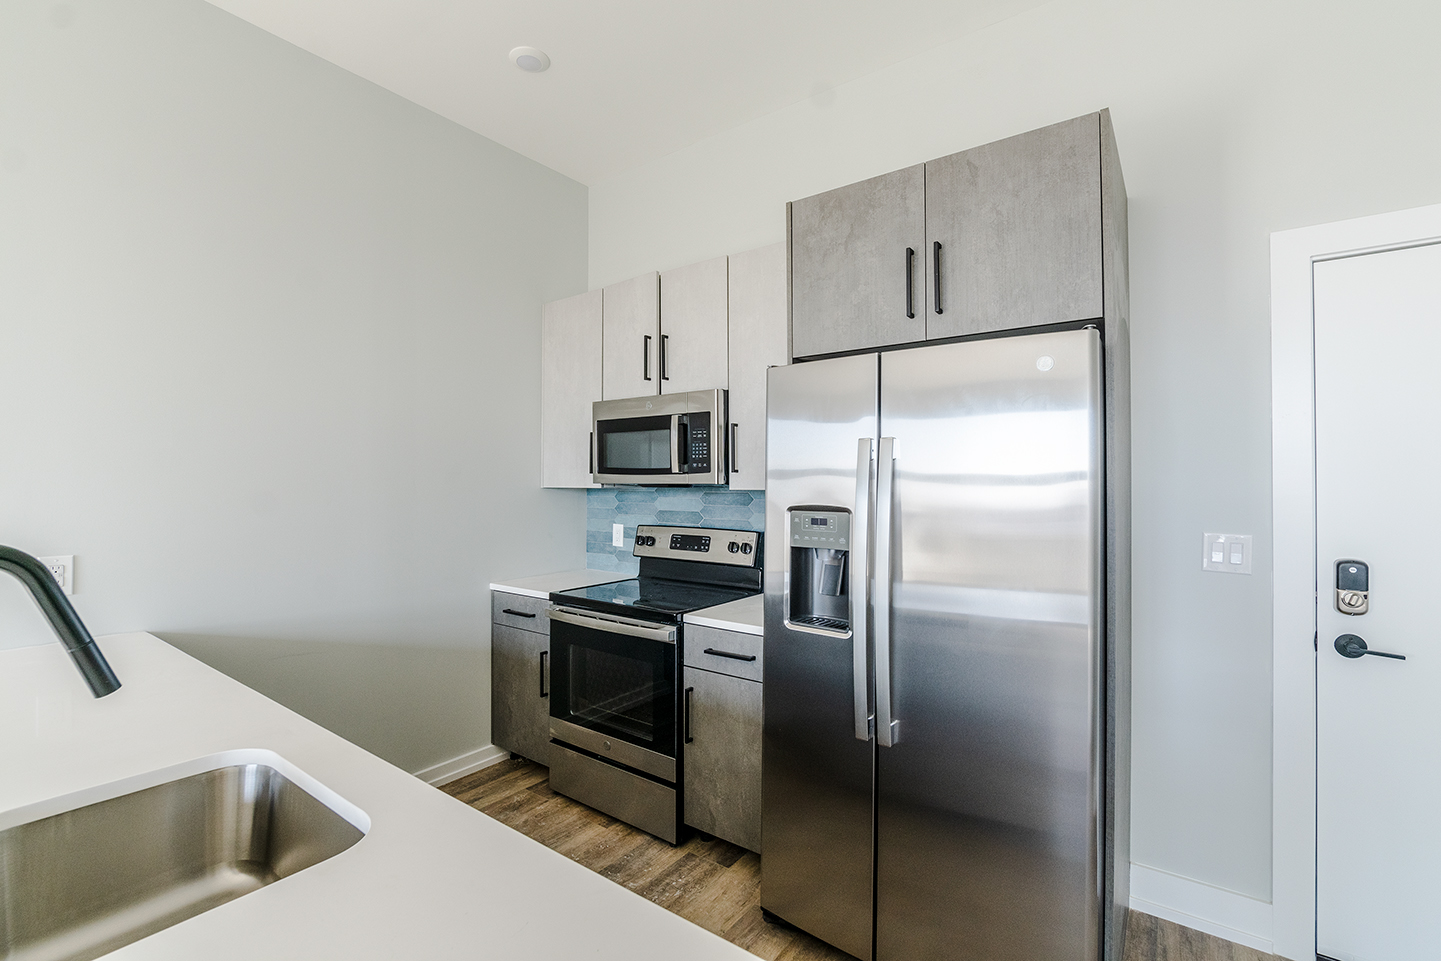 Property Photo For 2233 N 7th St, Unit 214